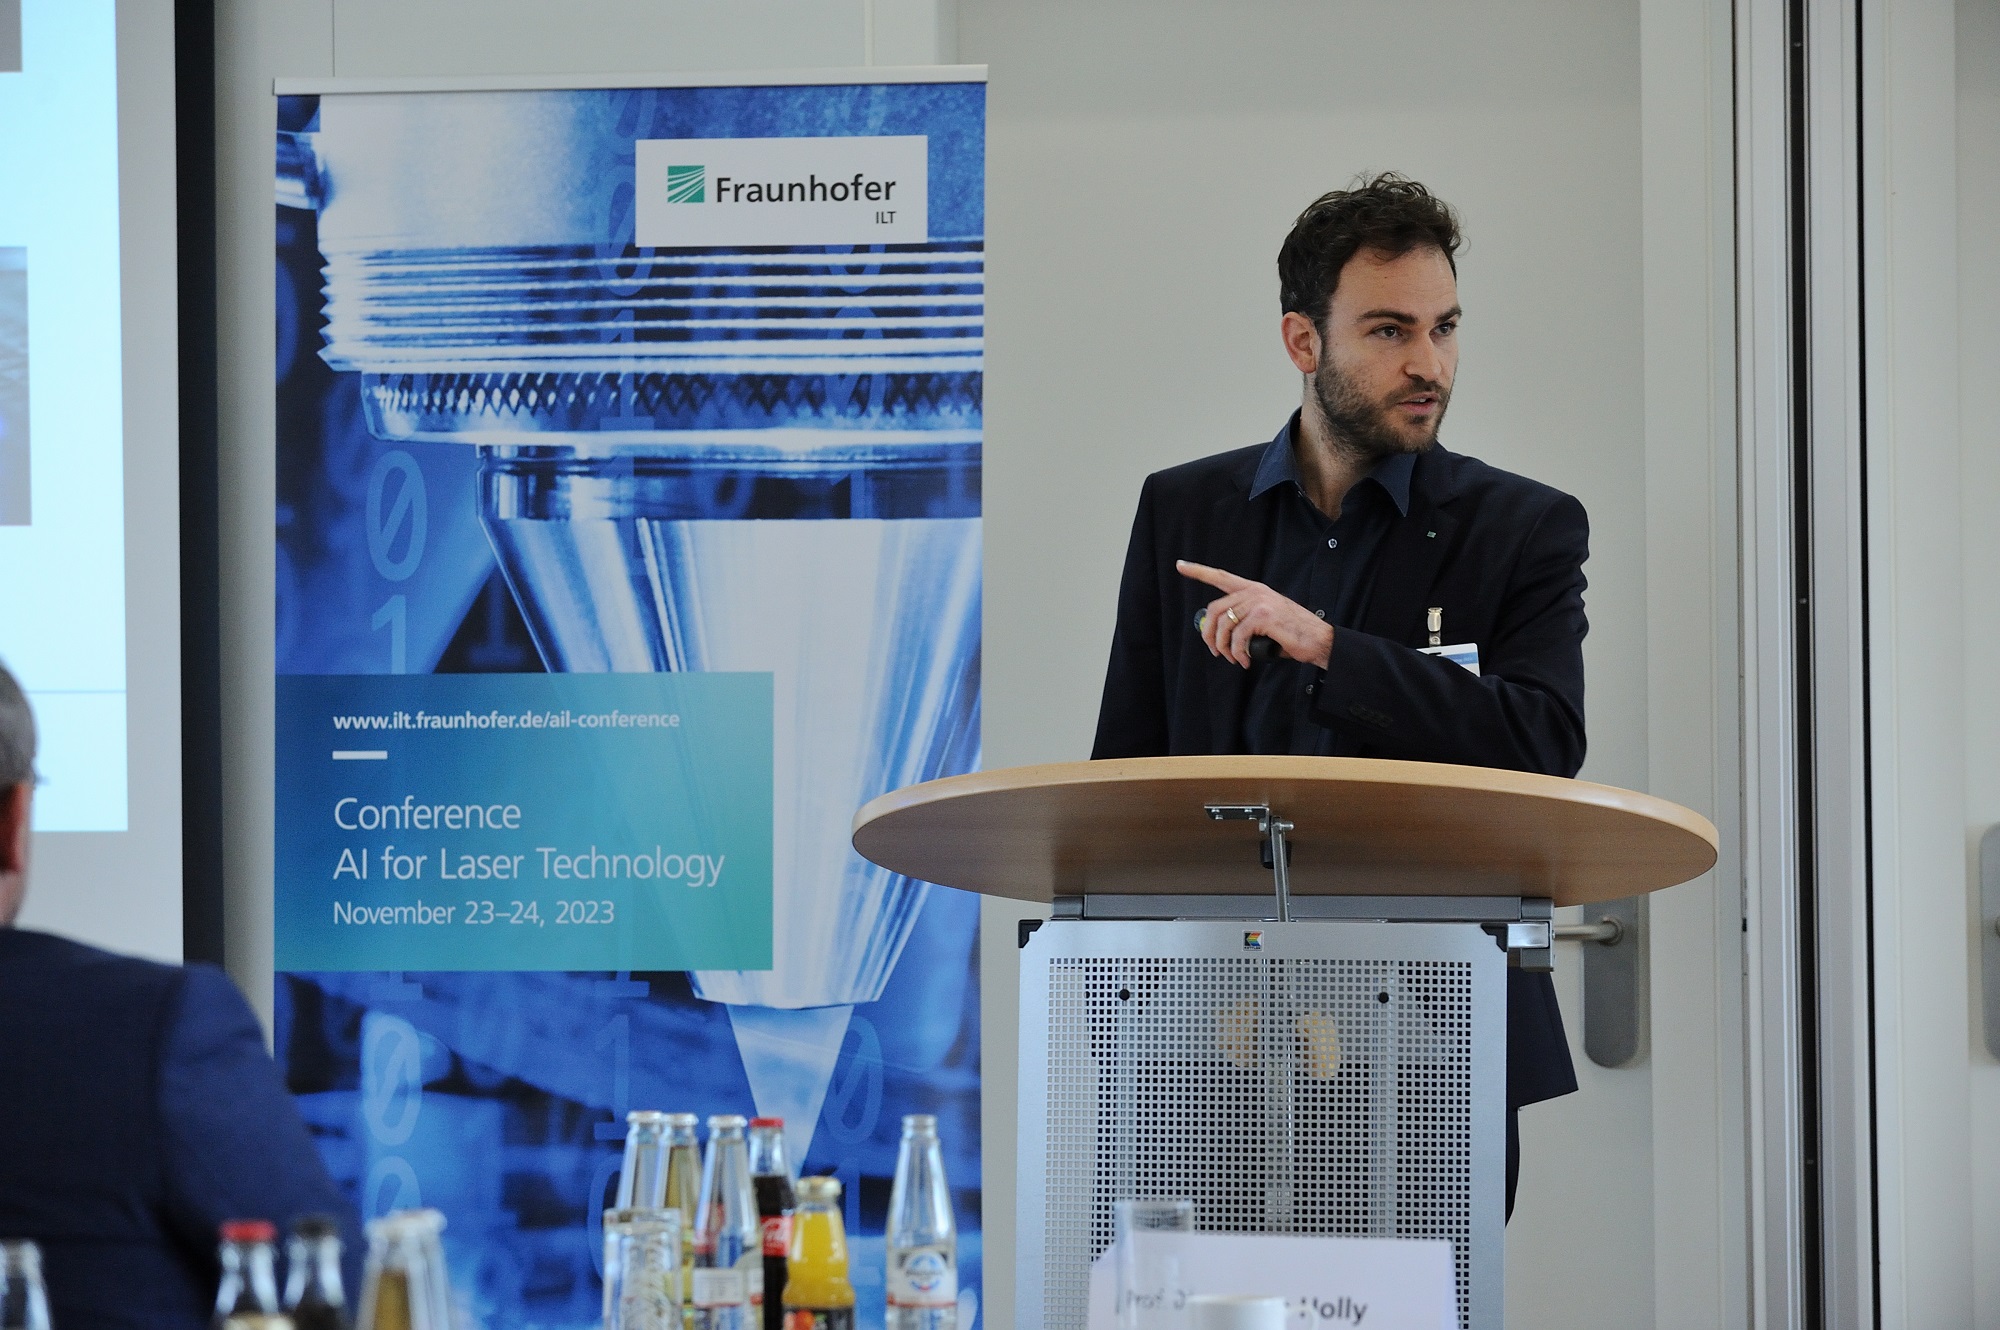 "If you close the control loop, you can build a machine that regulates itself. That is the roadmap we are following." Professor Carlo Holly, Head of the Data Science and Measurement Technology Department at Fraunhofer ILT.  